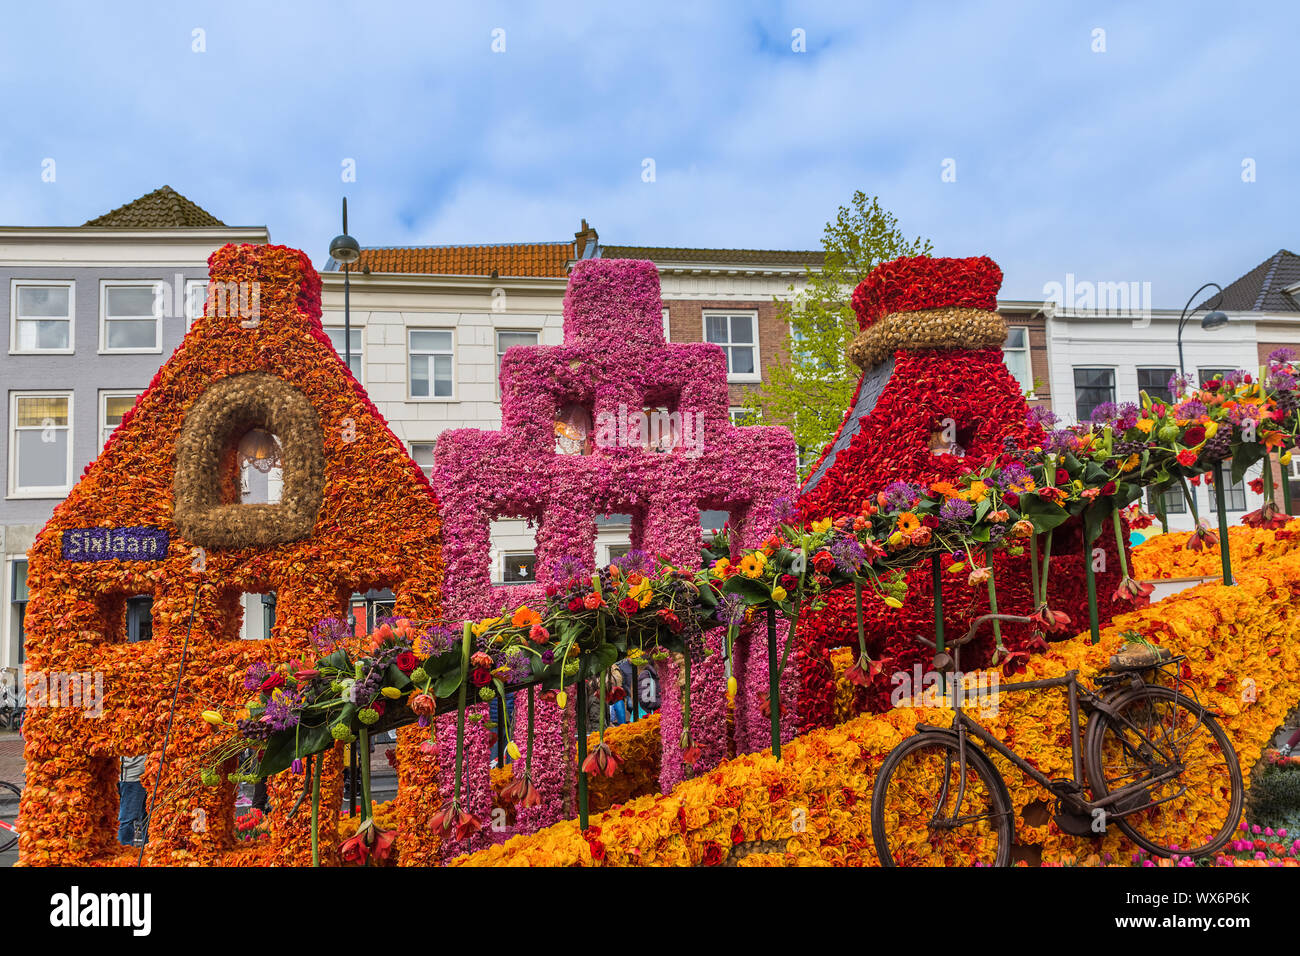 Statue made of tulips on flowers parade in Haarlem Netherlands Stock Photo